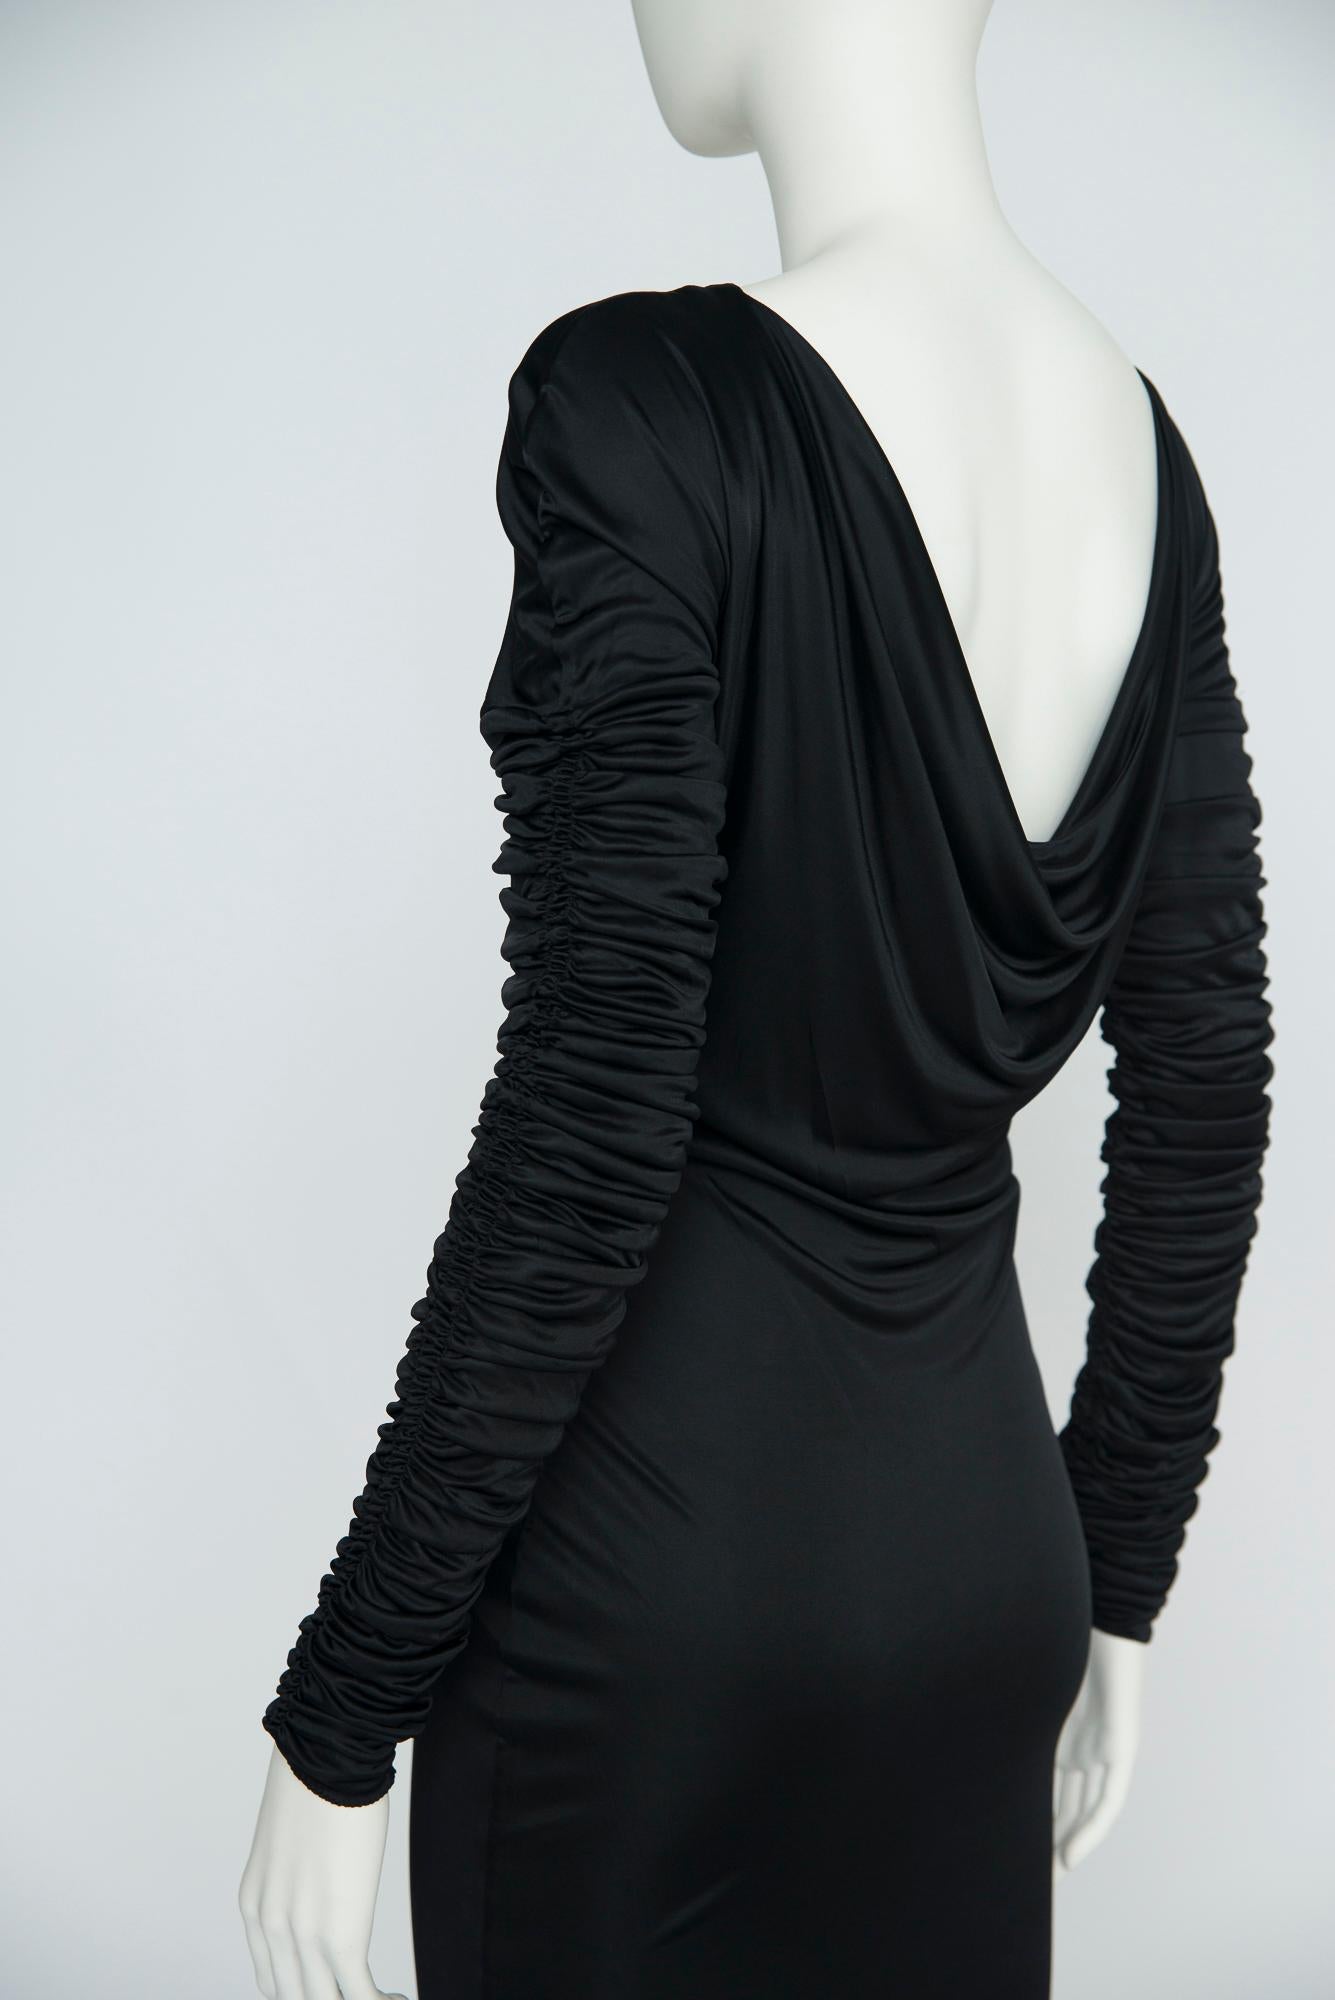 Designed to complement your shape, this Spring-Summer 2003 Gucci cocktail dress is made from black slinky stretch-satin jersey for a body-hugging fit. While the back reveals a glamorous plunging draped cowl neckline, the fully ruched long raglan